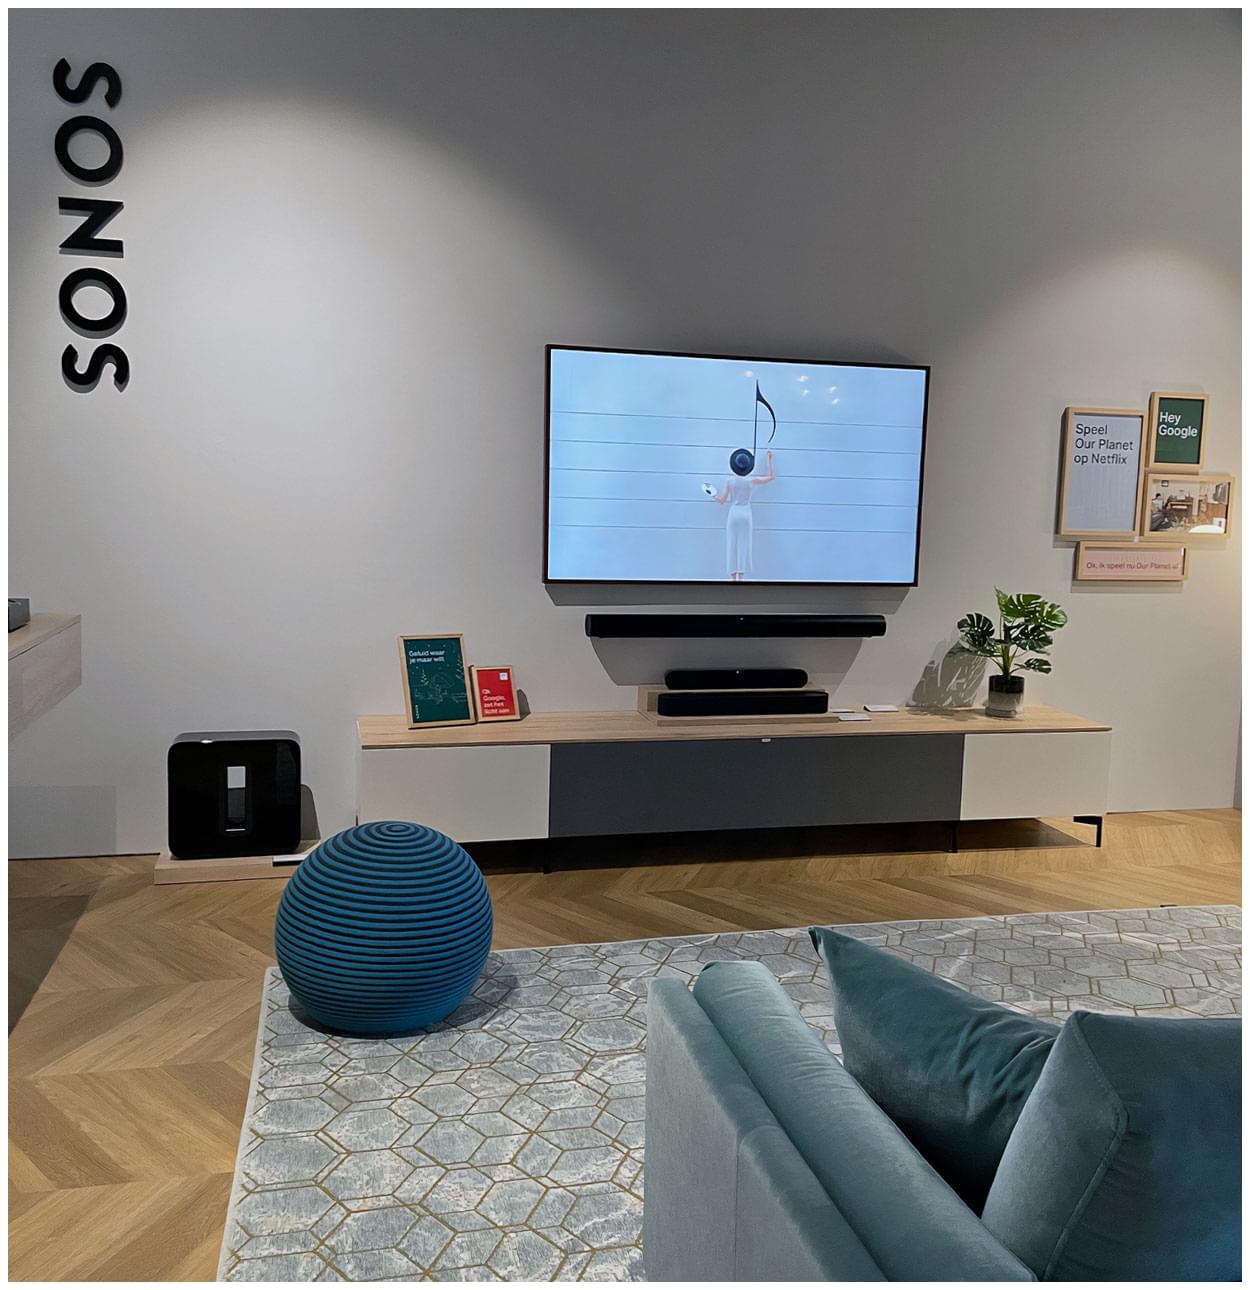 Sonos Experience Store - Spectral Showroom